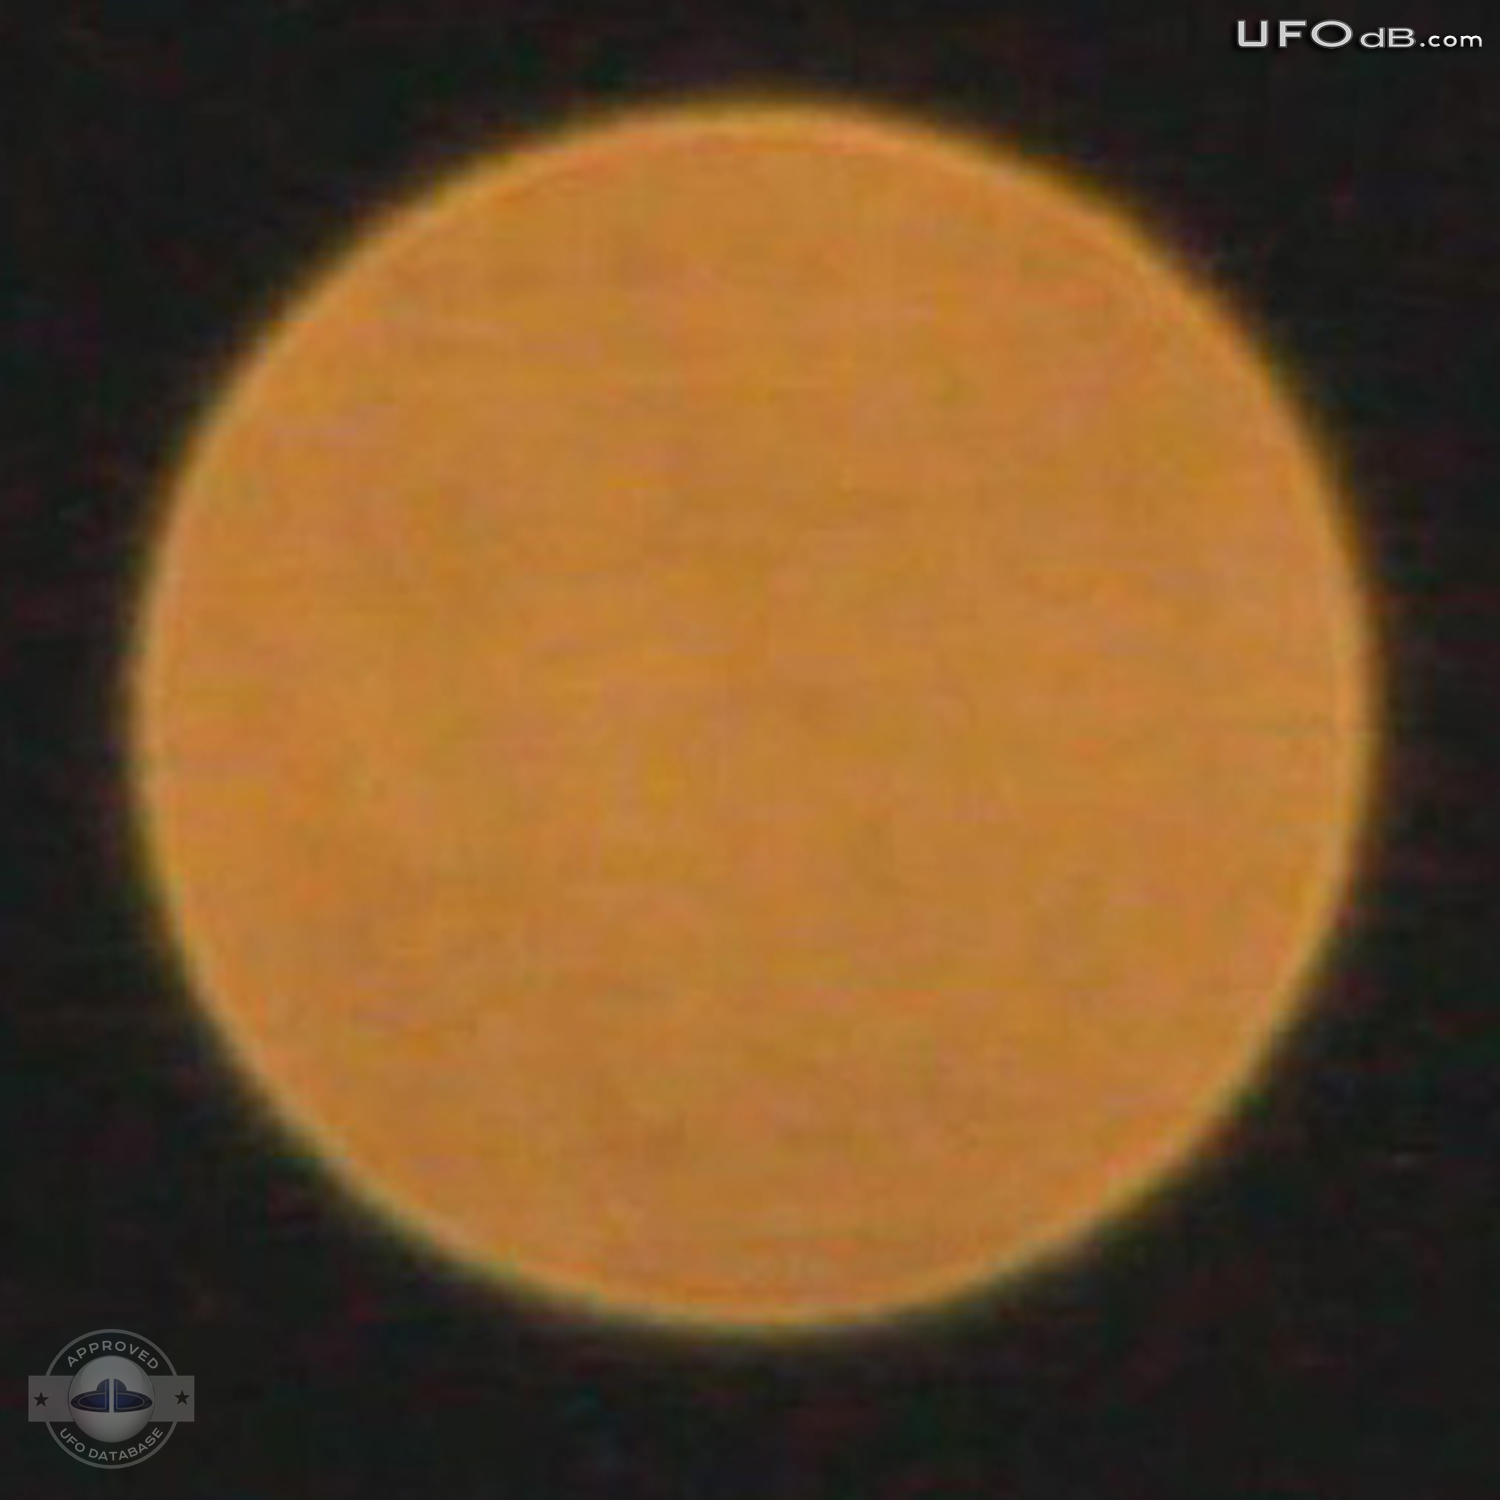 Perfect Orange Sphere UFO in Longueuil, Quebec, Canada | March 20 2011 UFO Picture #316-4